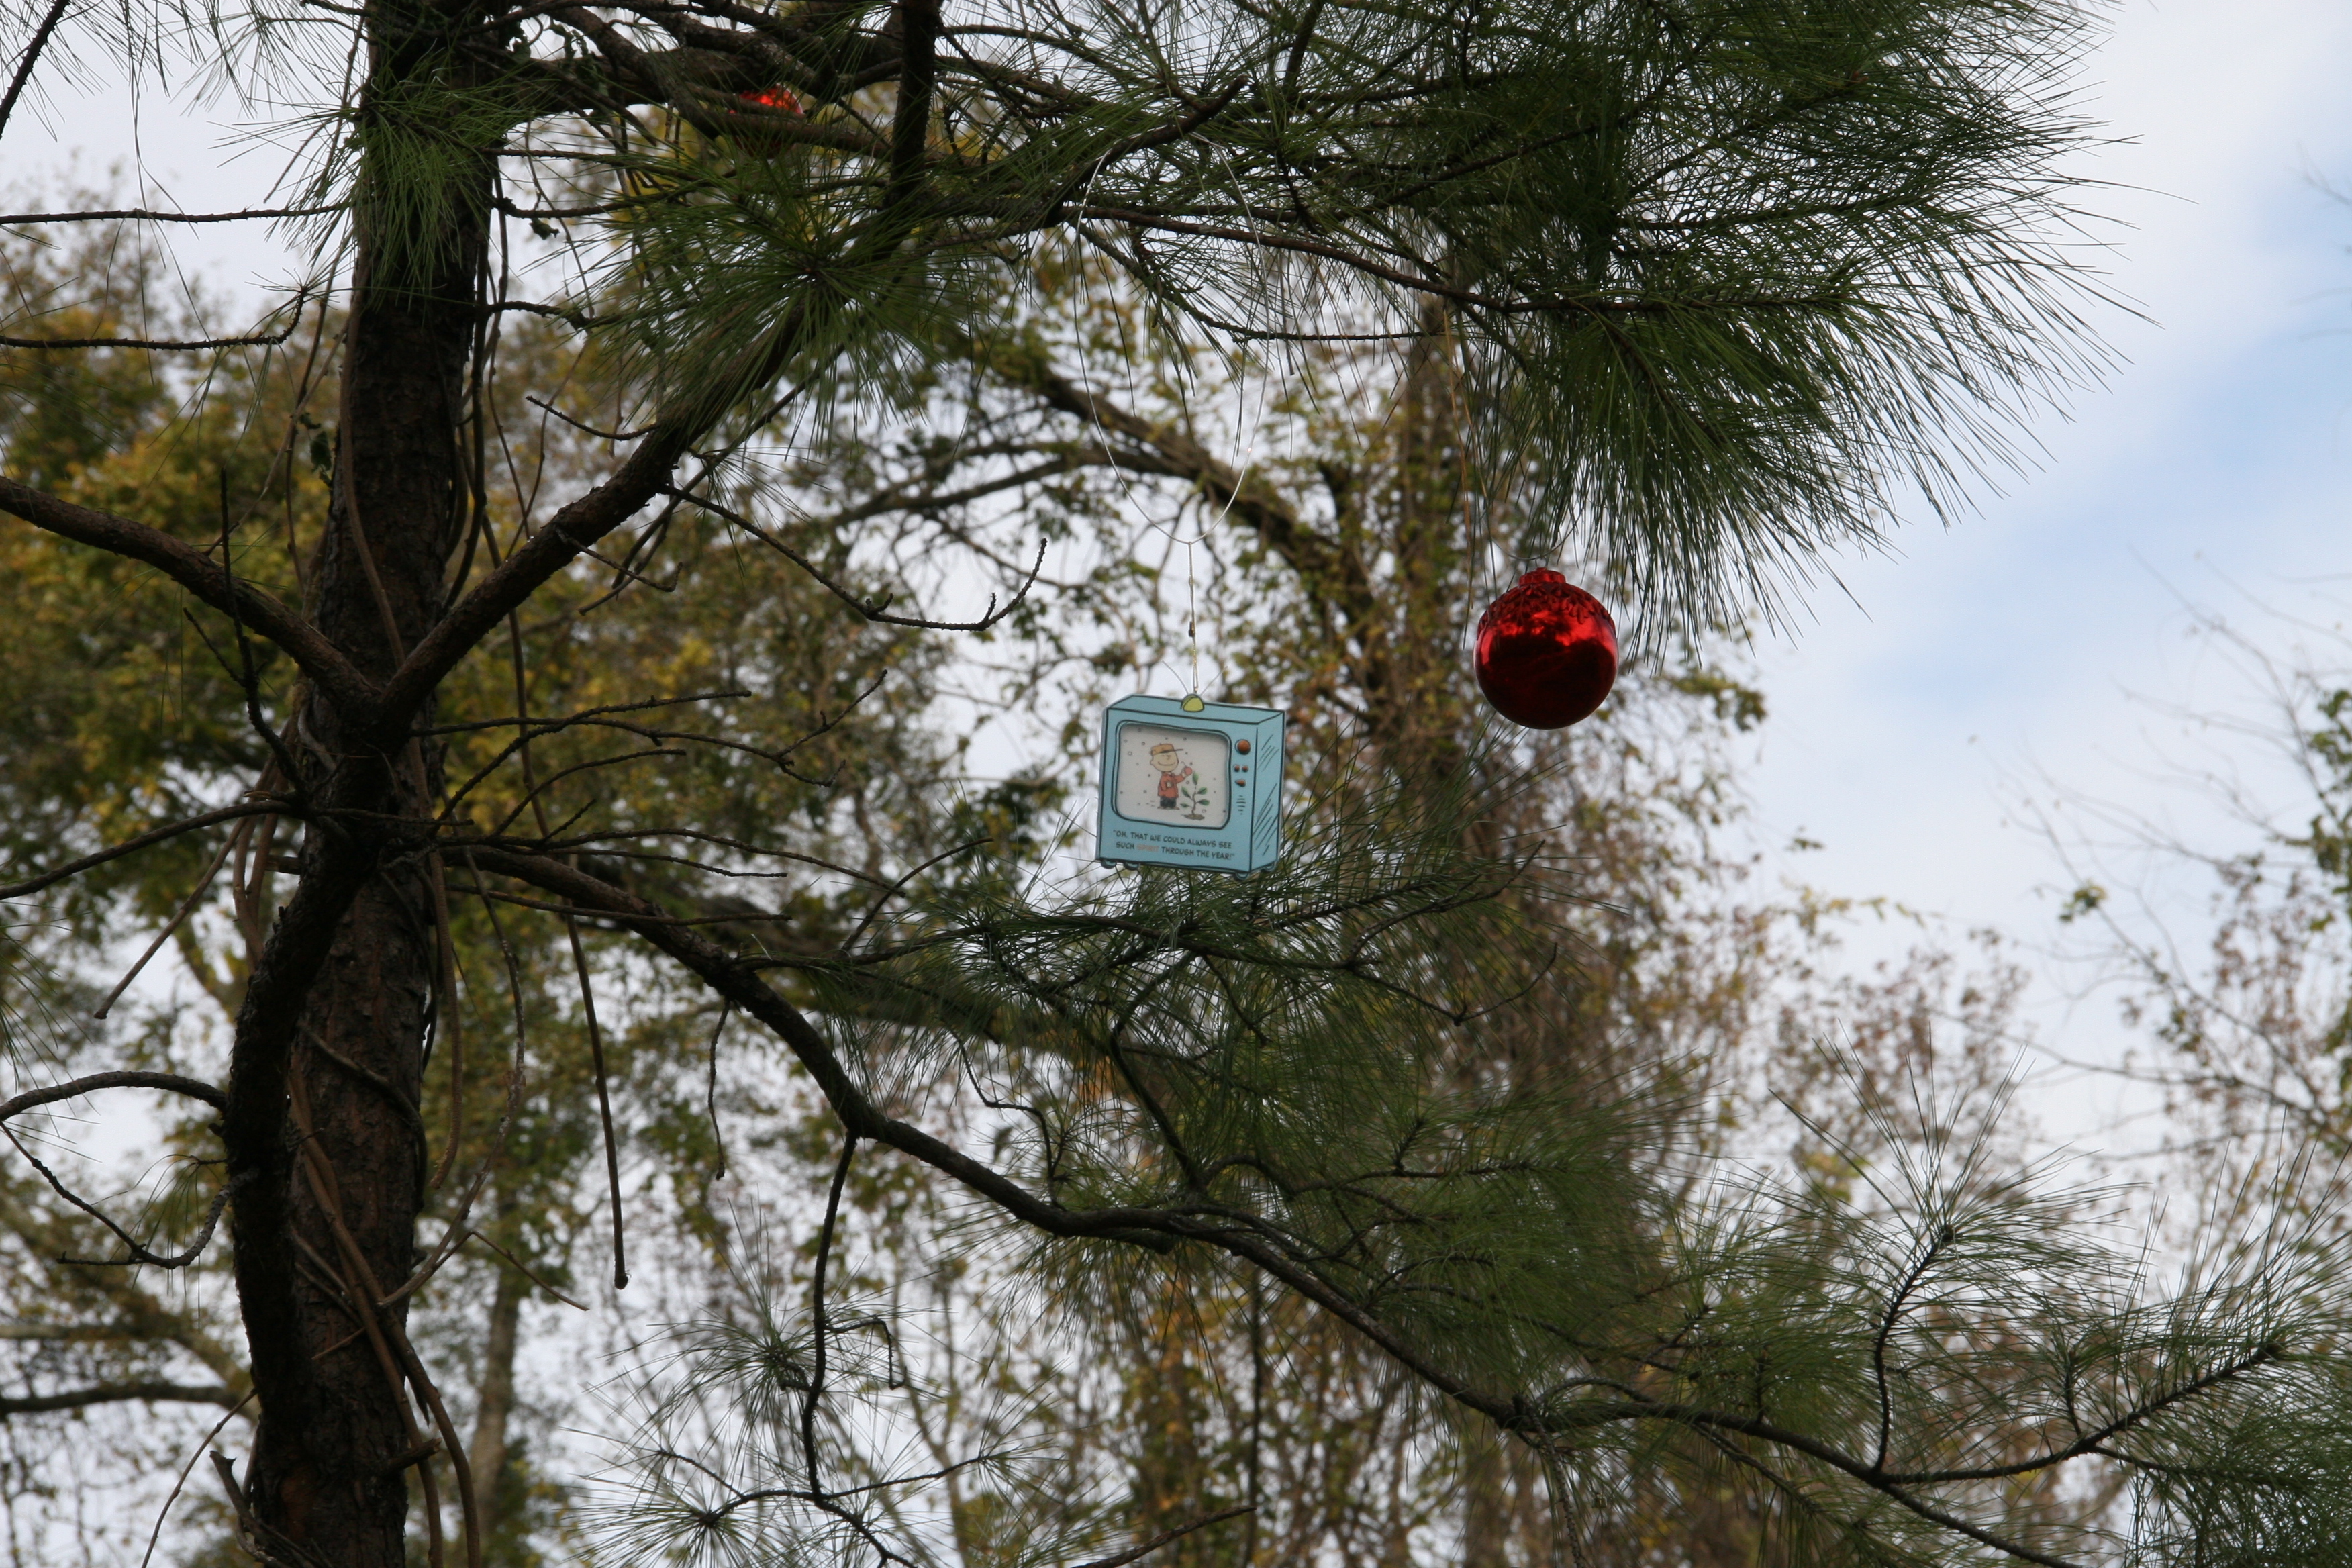 ‘Tis the Season: Charlie Brown tree decorated in Trussville